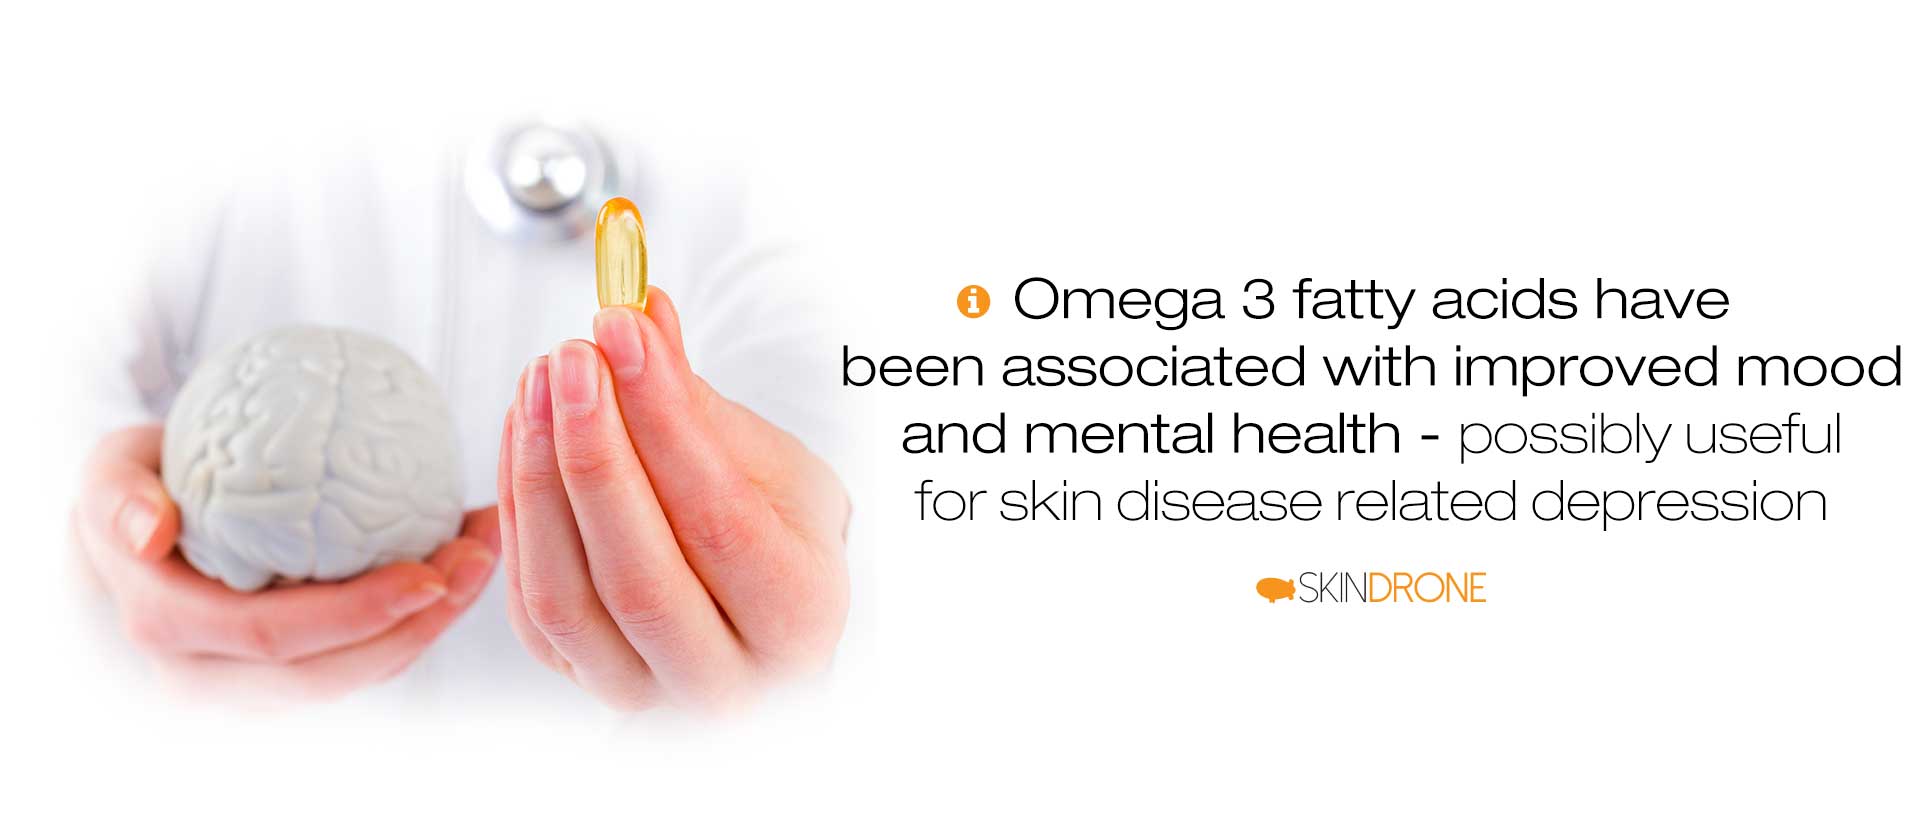 Banner indicating that the mental health benefits of omega 3 fatty acids can be helpful in depression related to seborrheic dermatitis - image shows a doctor holding a plastic white brain in one hand and a fish oil capsule in the other